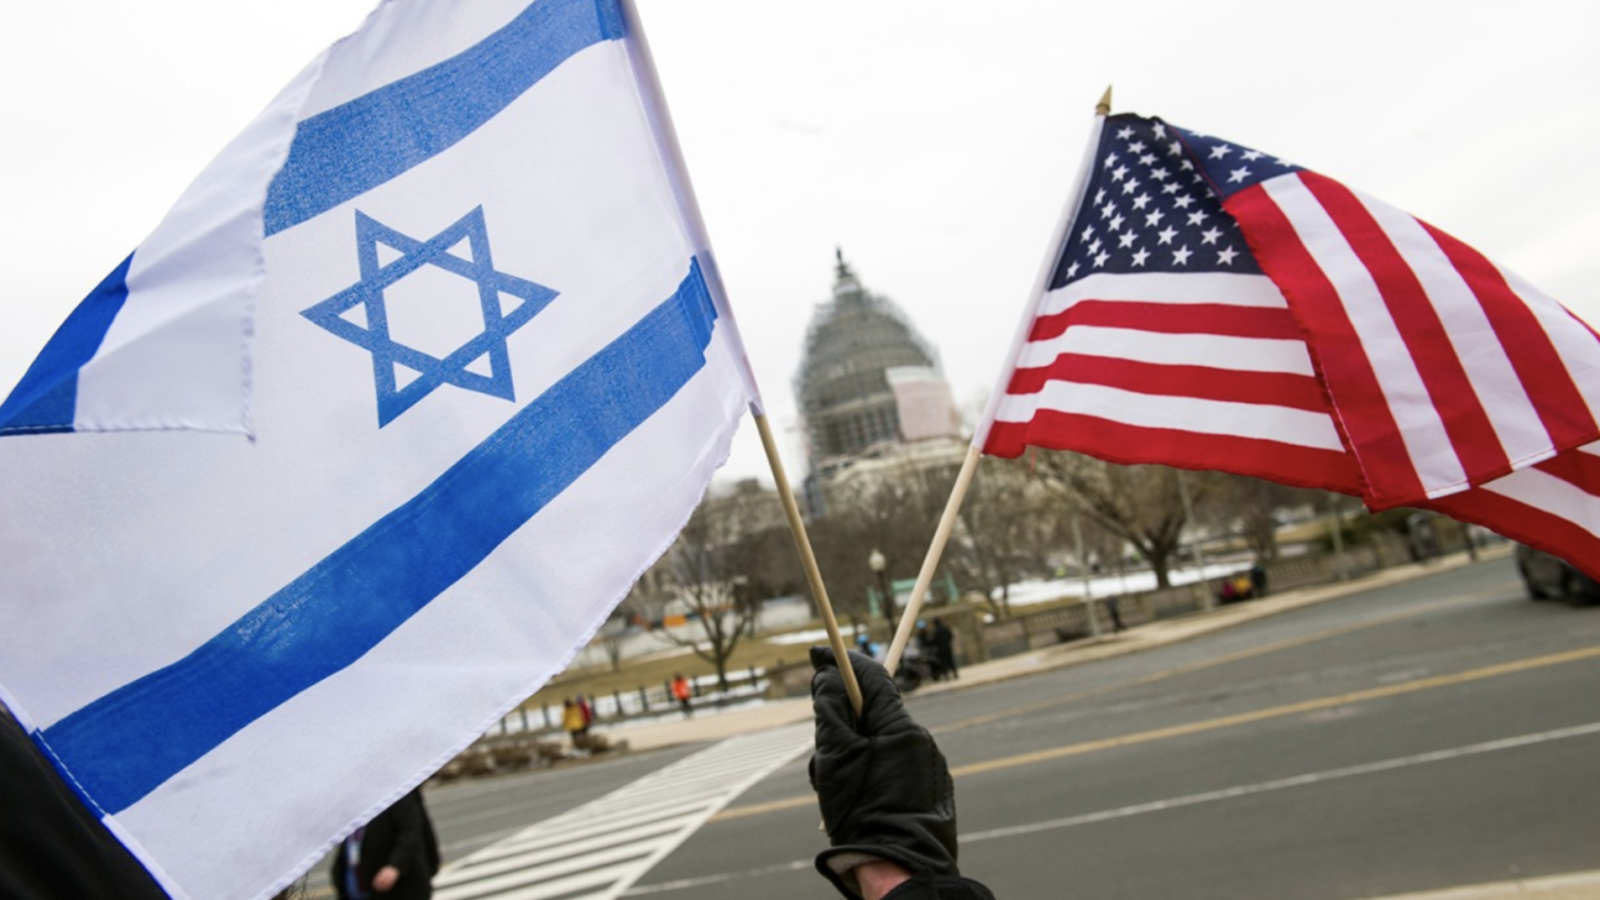 A hand waving the flags of the U.S. and Israel in front of the U.S. capitol building